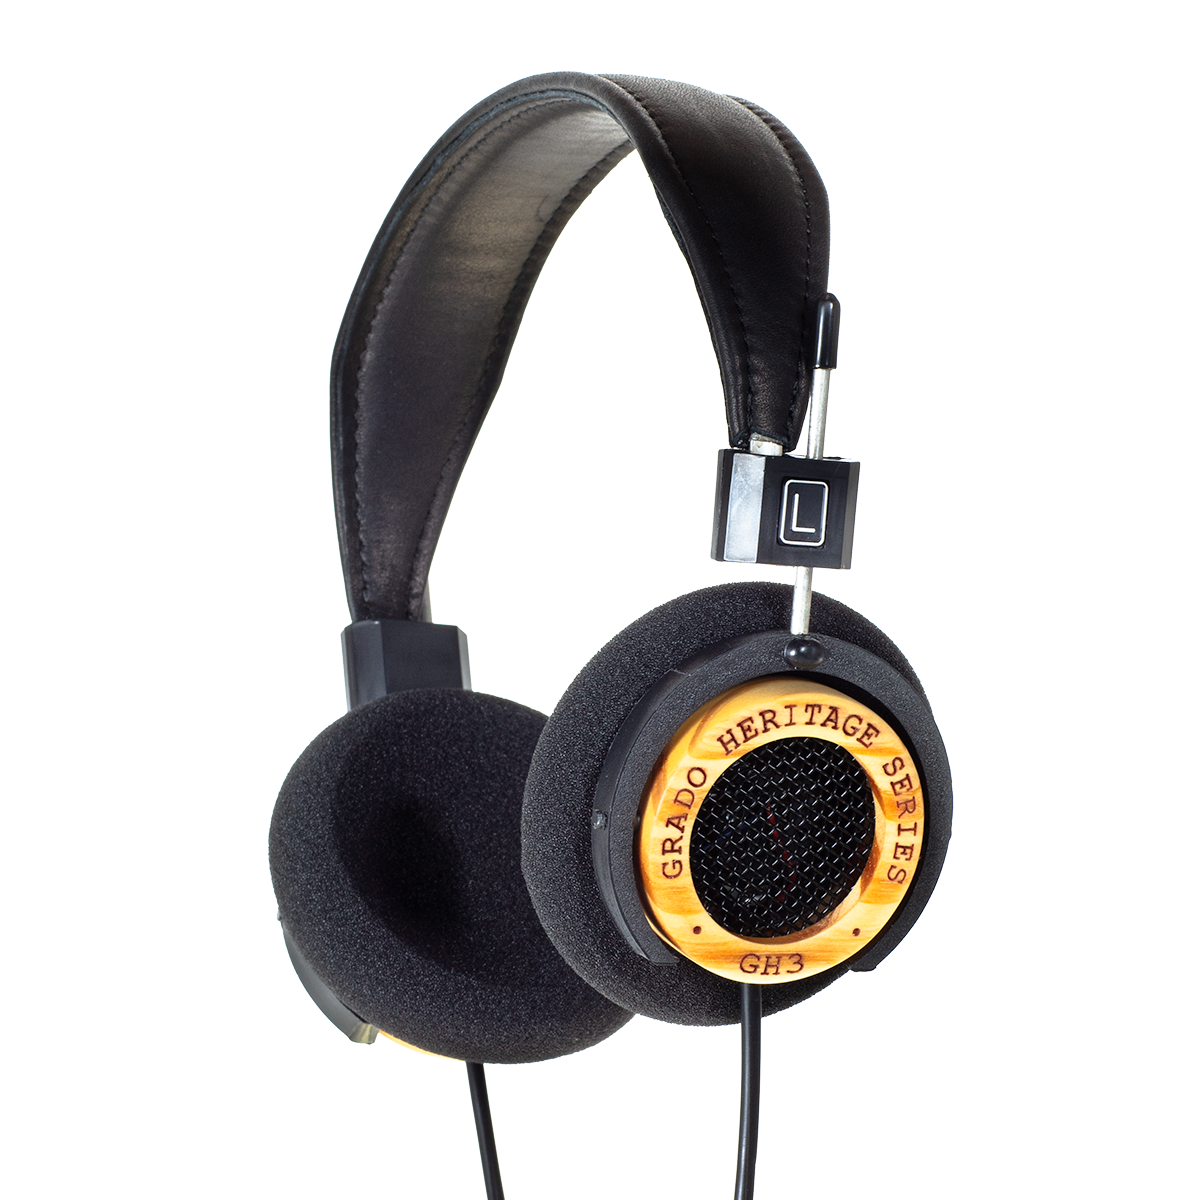 3/4 view photo of GH3 headphones on a white background